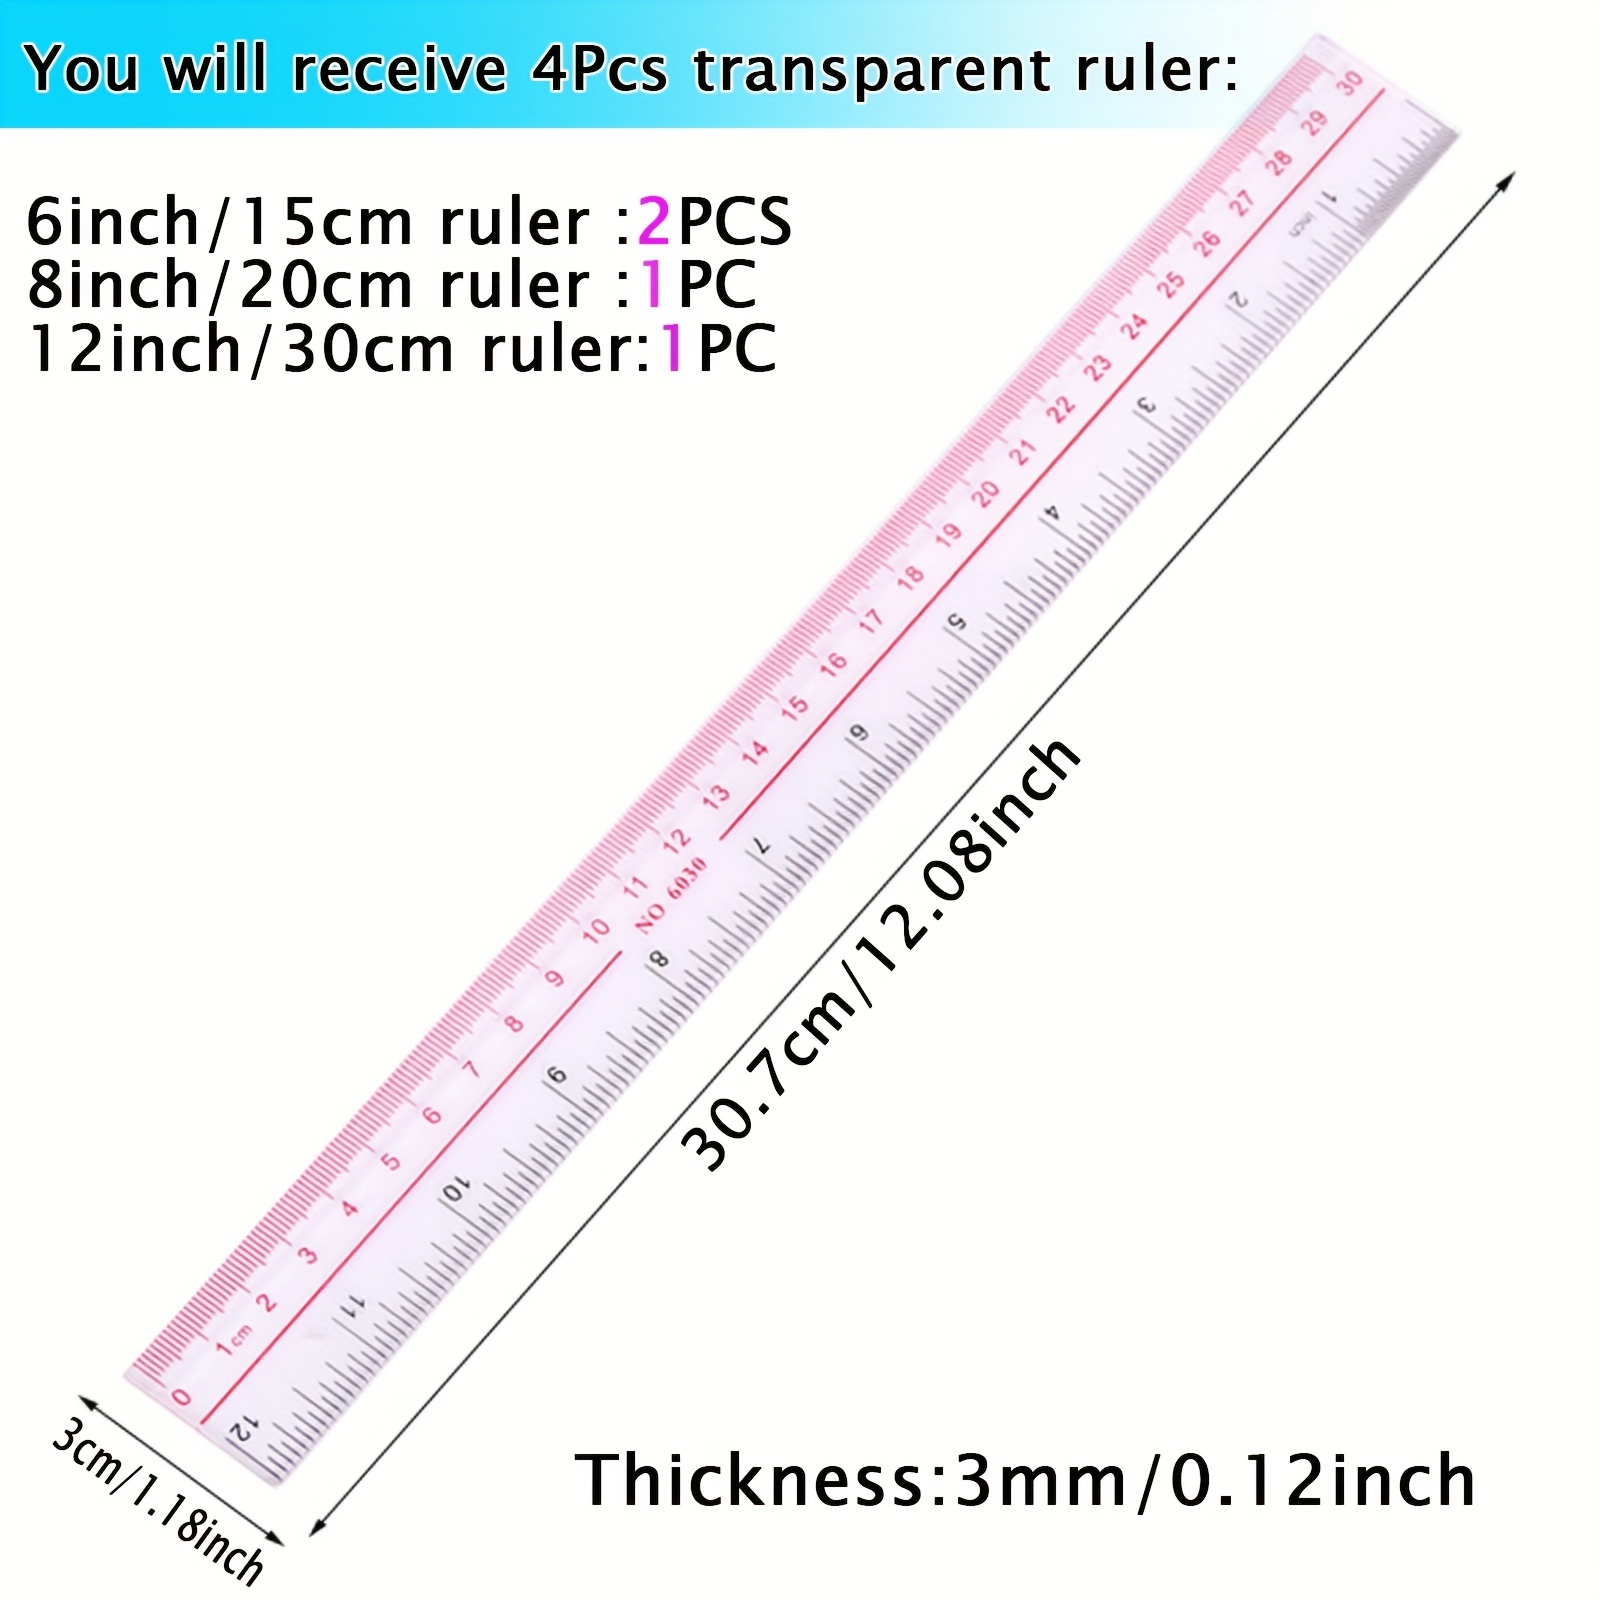 6 Pcs Clear Ruler ,6 inch Ruler, Plastic Ruler, Drafting Tools, Rulers for  Kids, Measuring Tools, Ruler Set, Ruler inches and Centimeters, Transparent